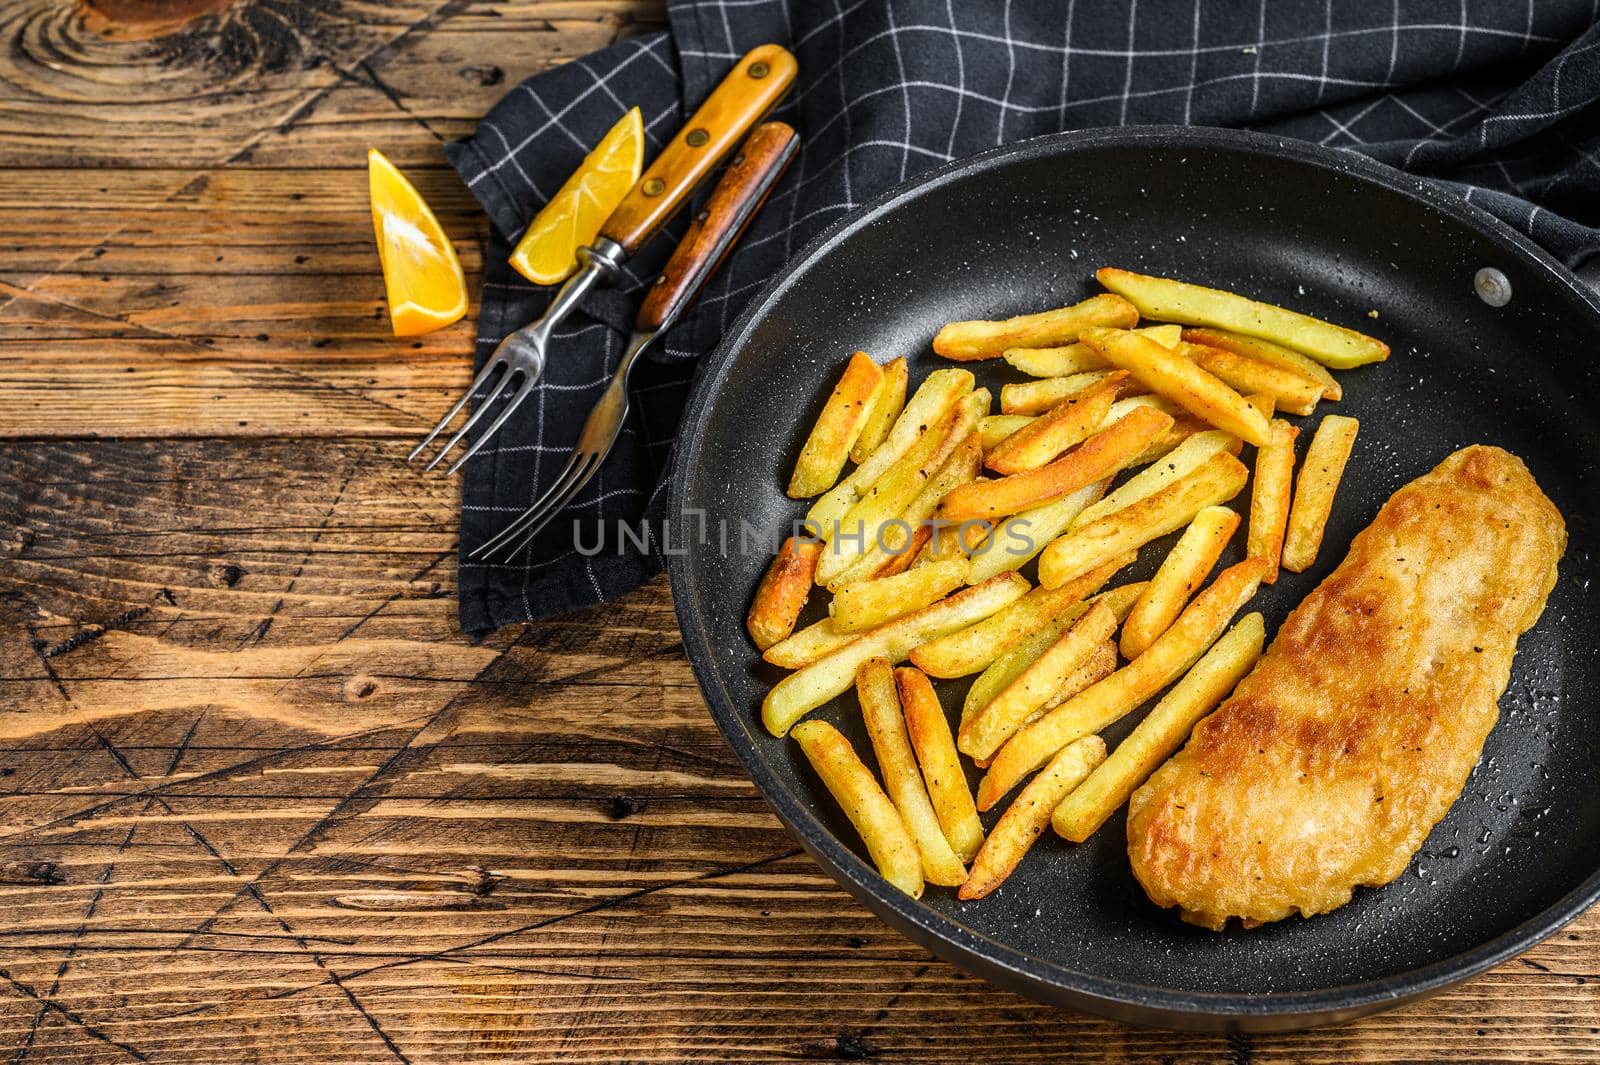 English Traditional Fish and chips dish in a pan. Wooden background. Top view. Copy space.